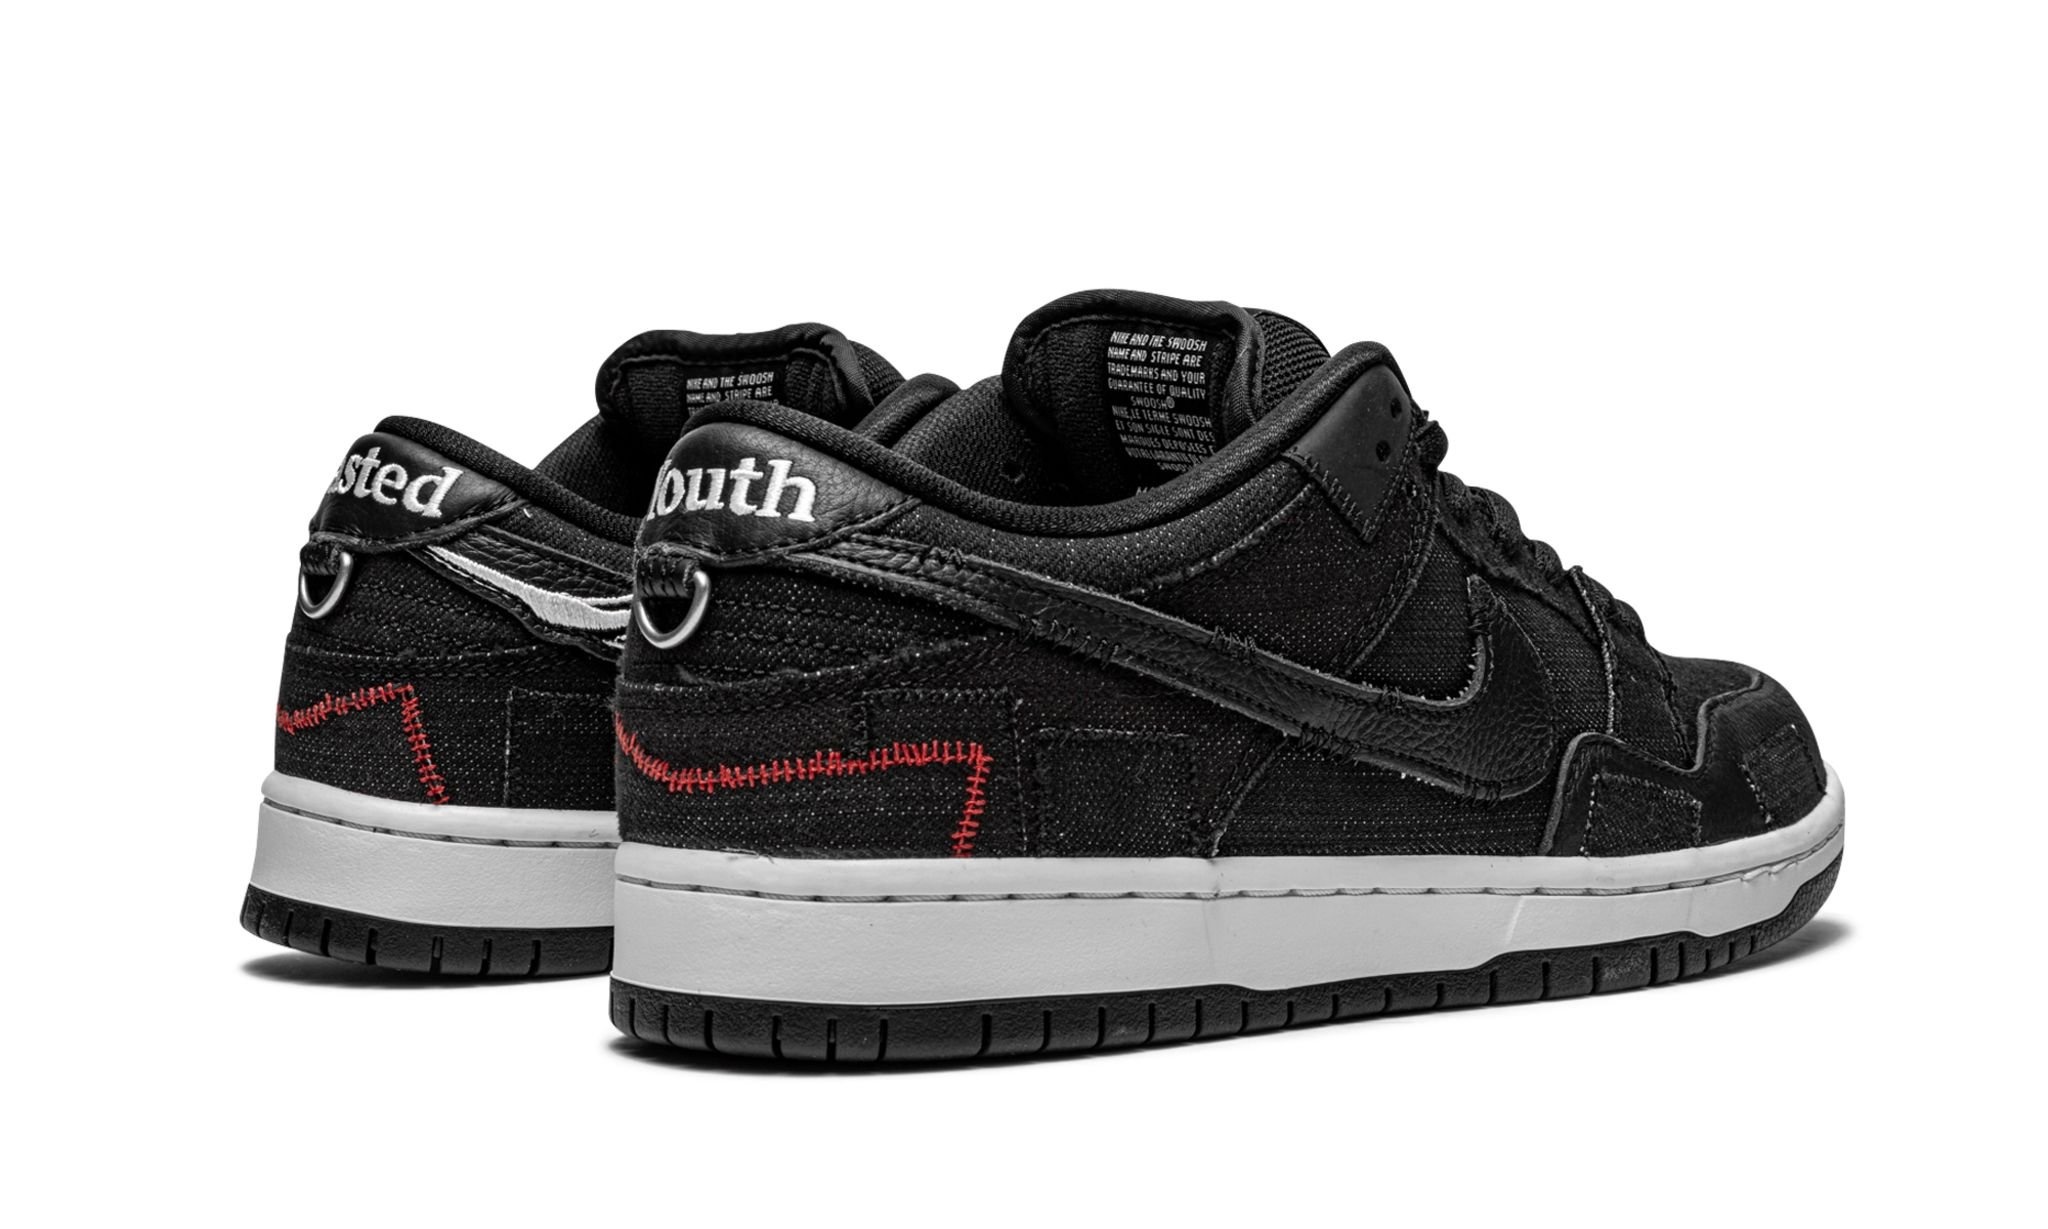 SB Dunk Low "Wasted Youth - Special Box" - 3